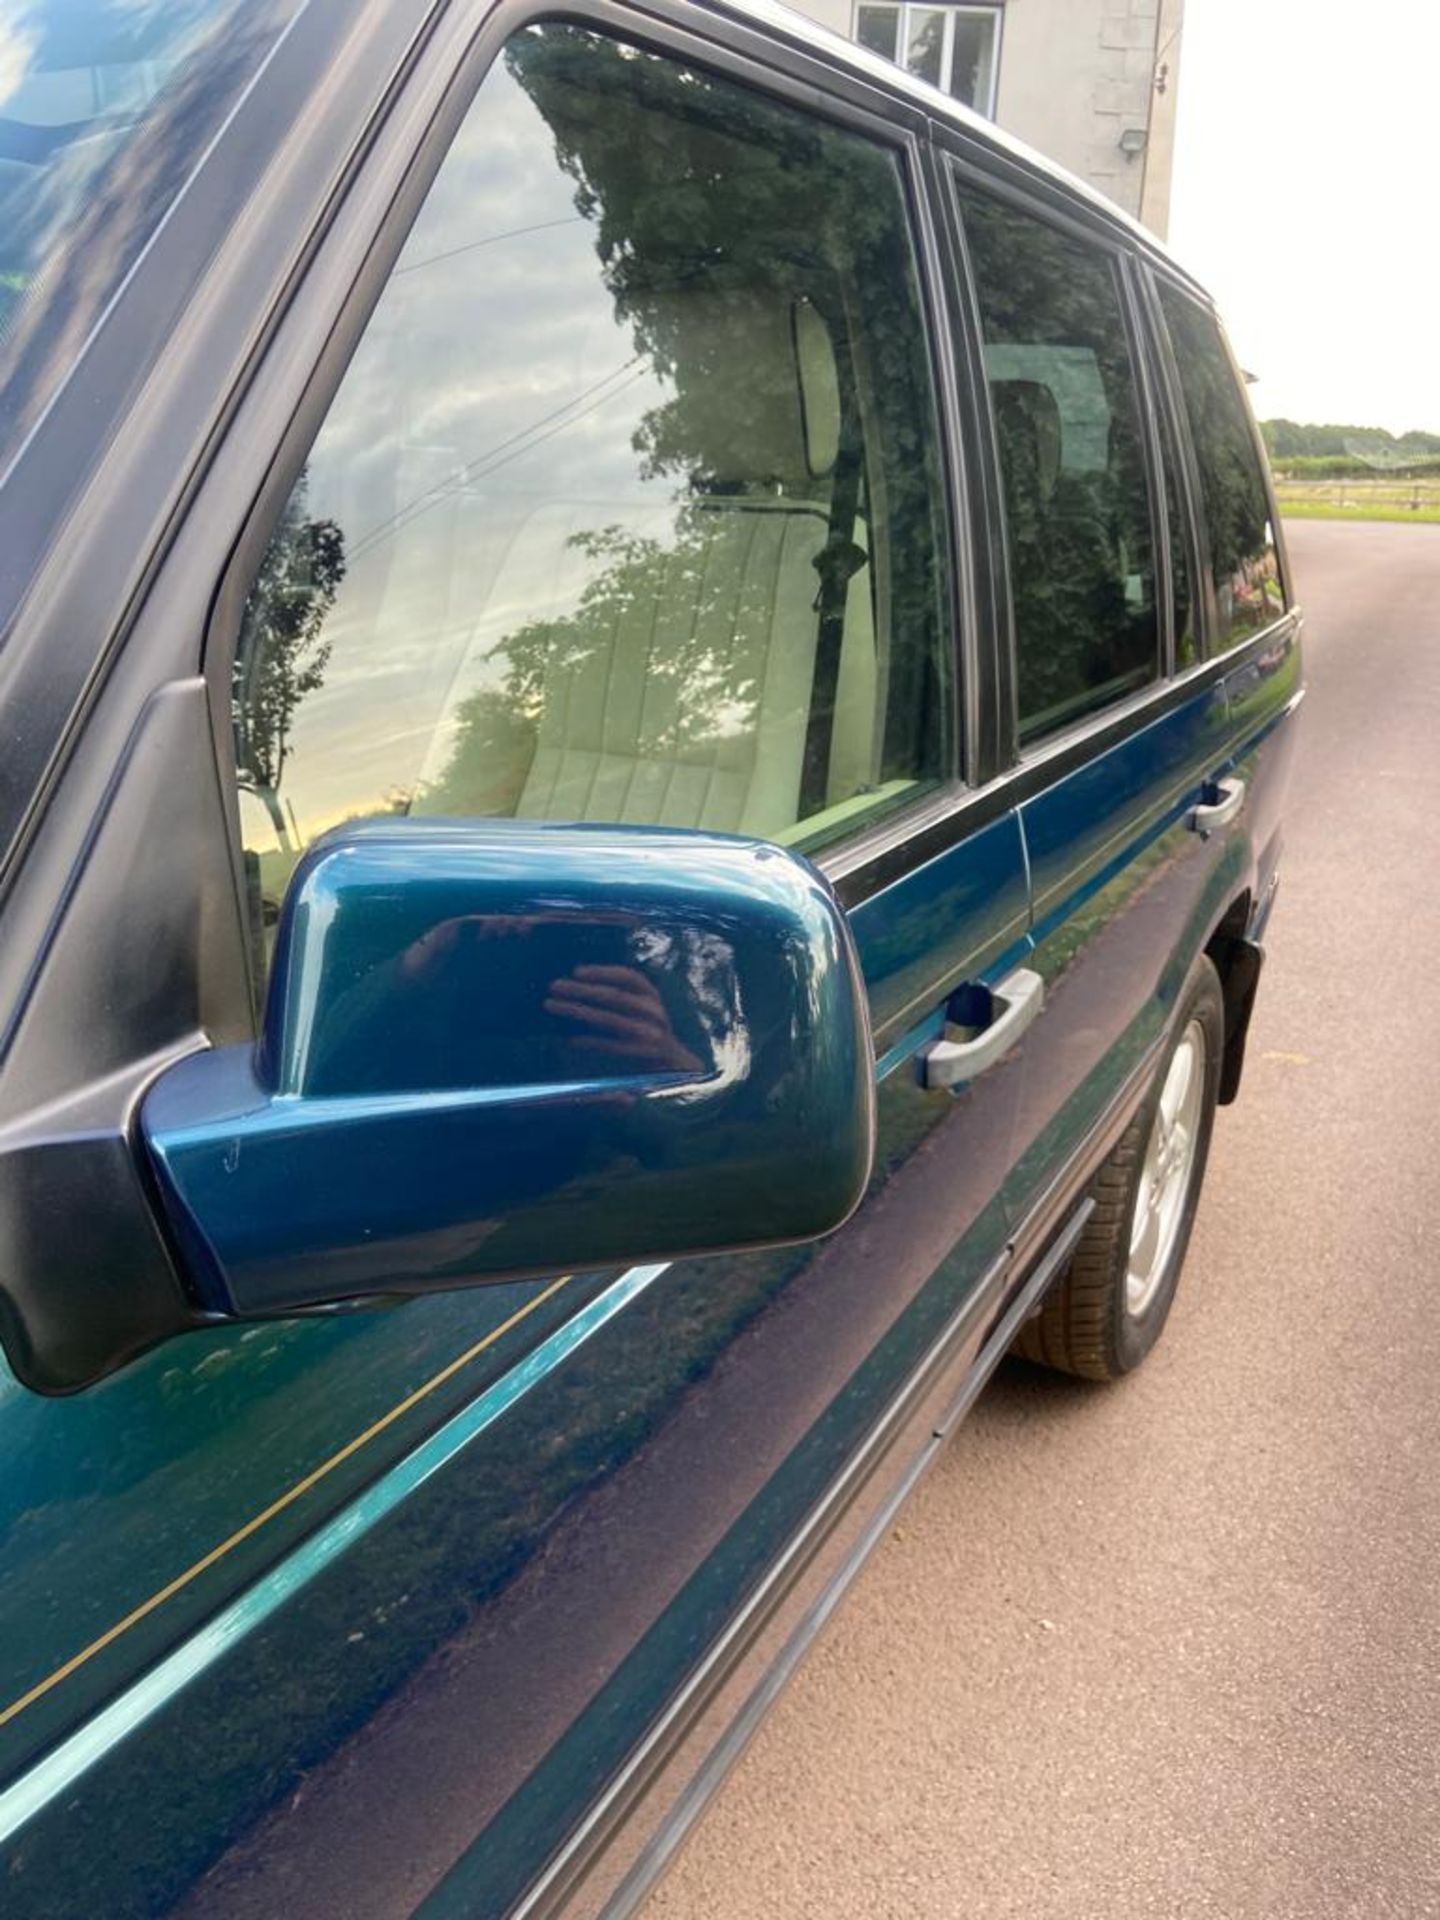 1998 Limited Edition Range Rover P38 - Image 18 of 39